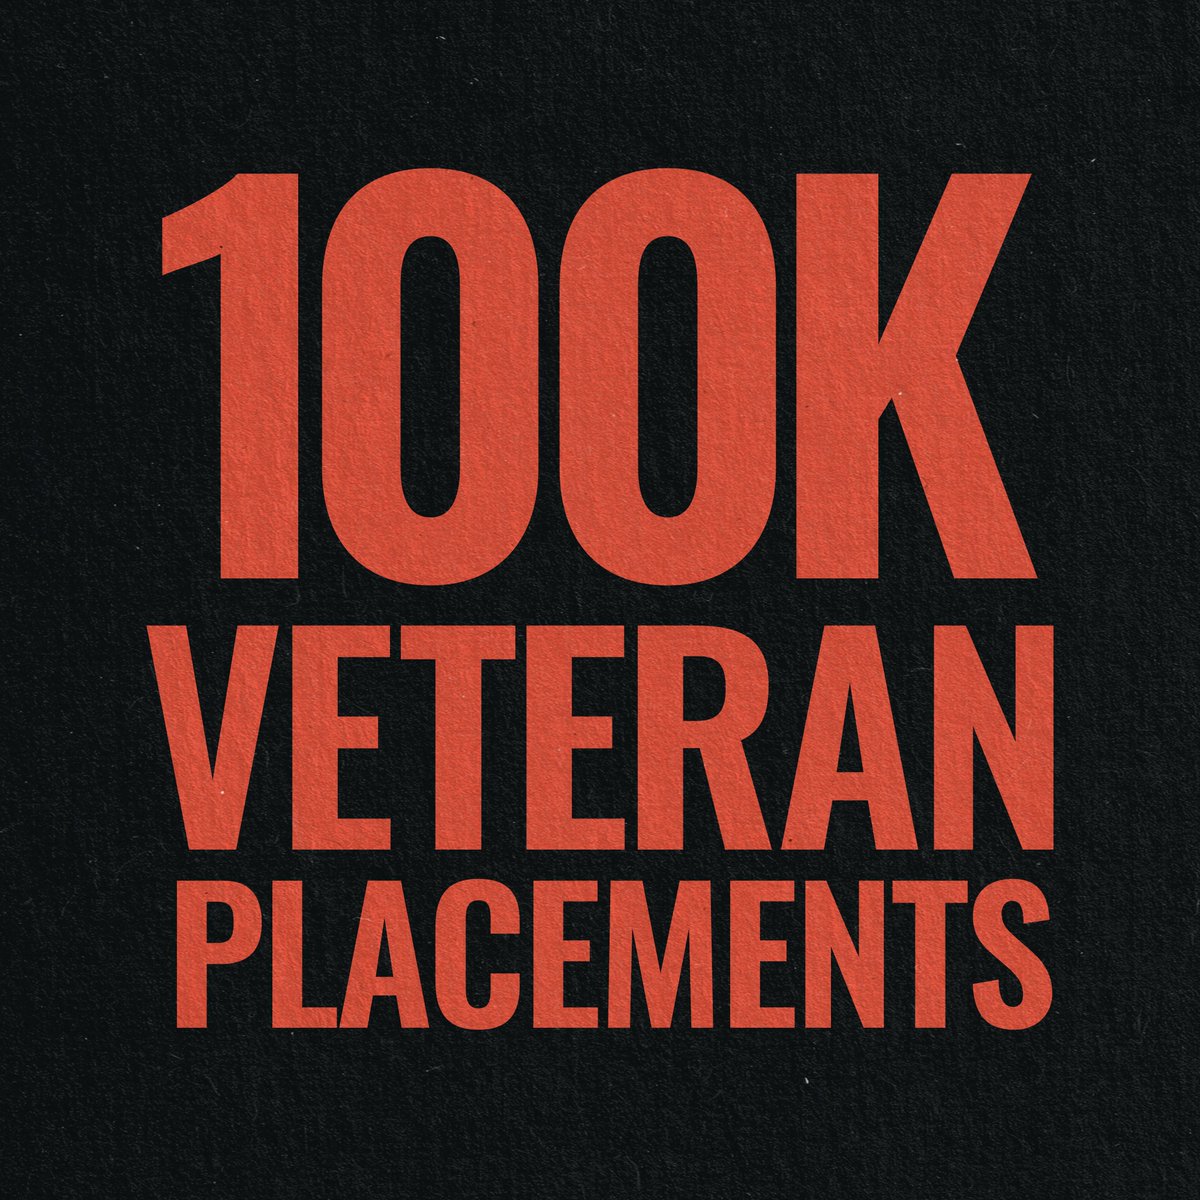 We’ve spent the past 12 years helping over #100KVeterans find meaningful careers after their service. Today, we’re proud to share some of the knowledge we’ve gained with anyone passionate about veteran employment! https://t.co/FPIQcUvy96 https://t.co/p58IujFaxt.